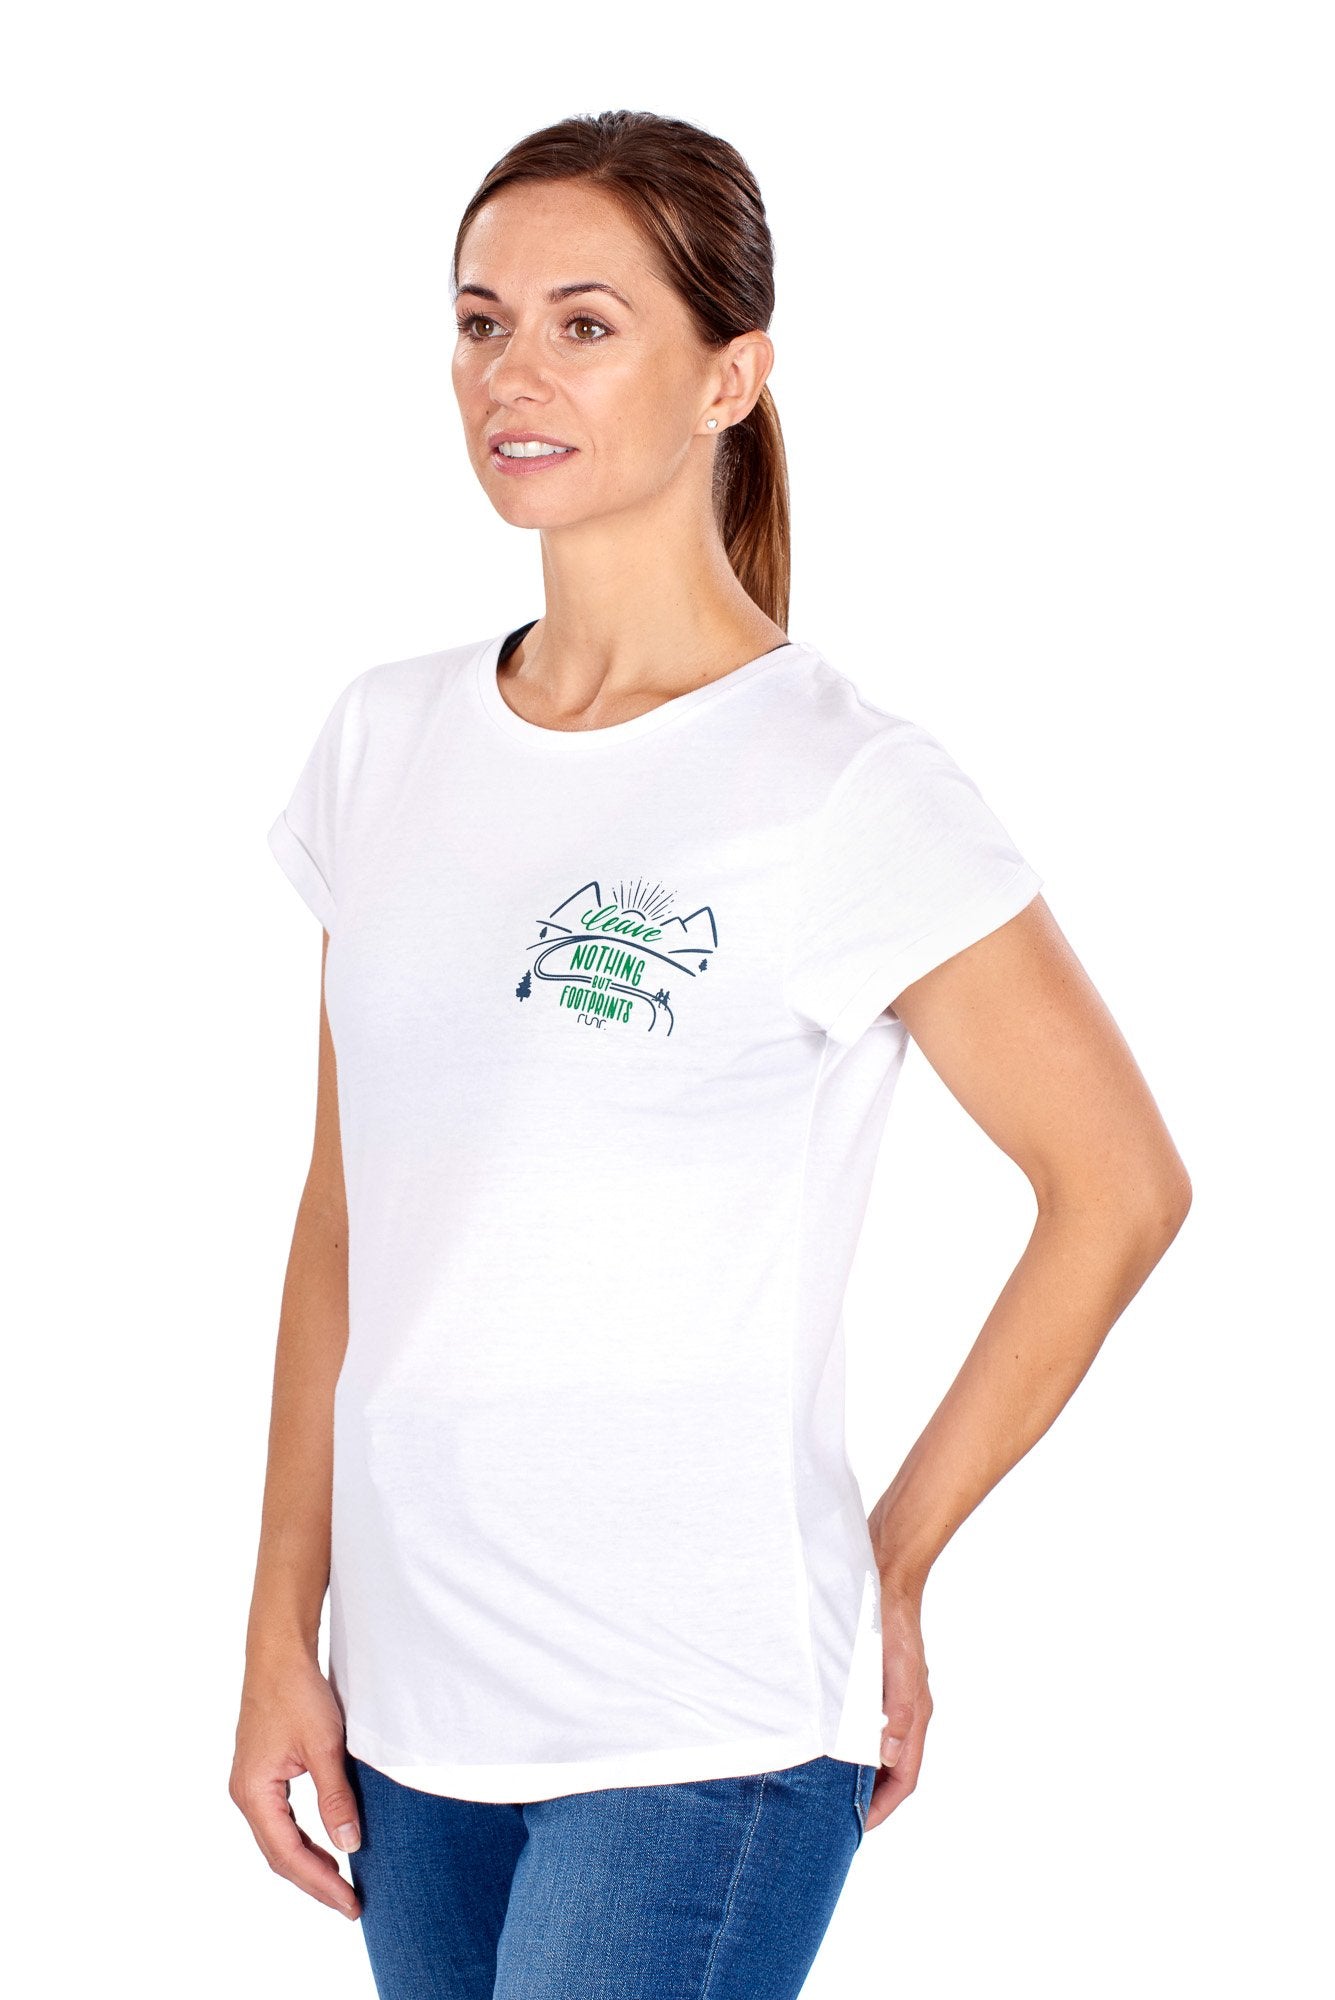 Women's 'Leave Nothing But Footprints' Runr T-Shirts - white